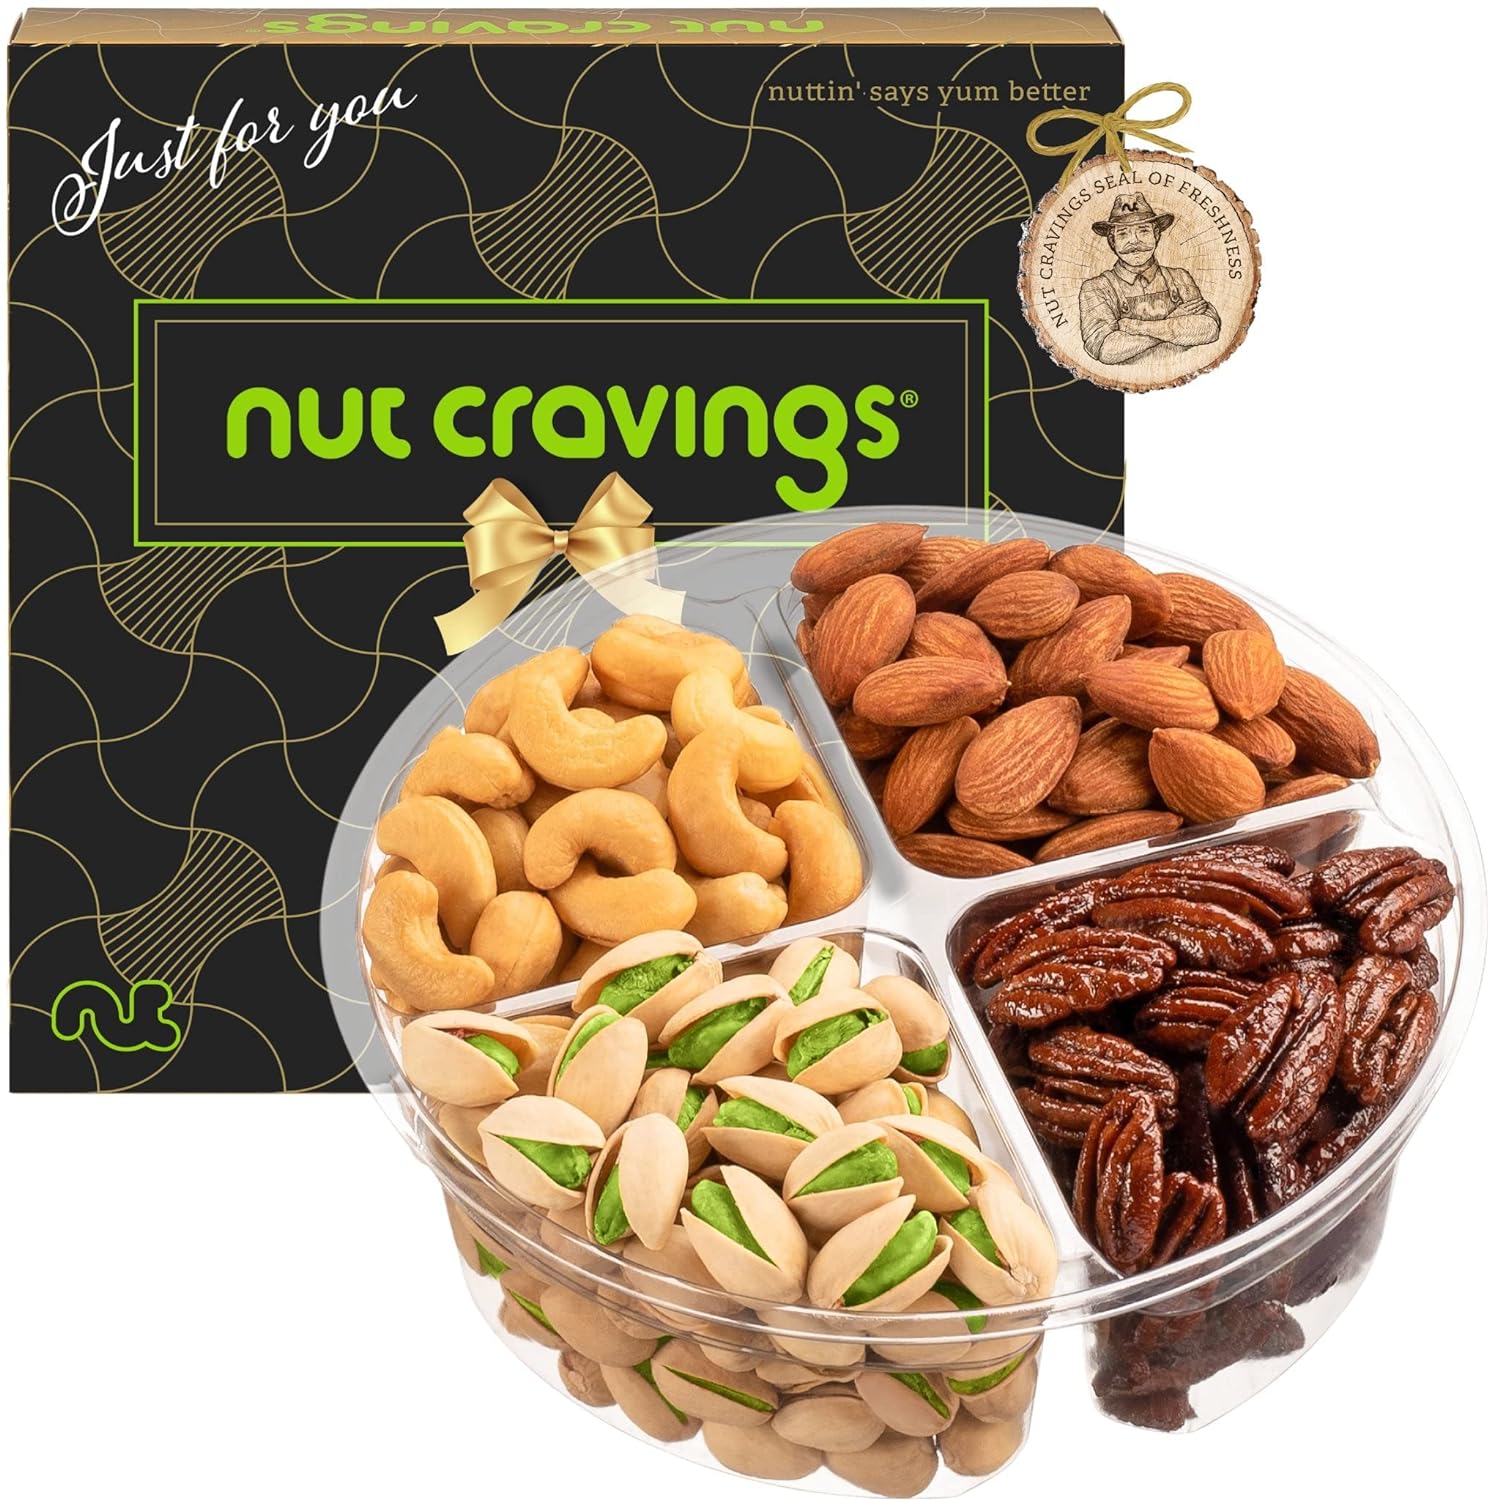 Nut Cravings Gourmet Collection - Mothers Day Mixed Nuts Gift Basket in Black Gold Box (4 Assortments) Arrangement Platter, Birthday Care Package - Healthy Kosher USA Made